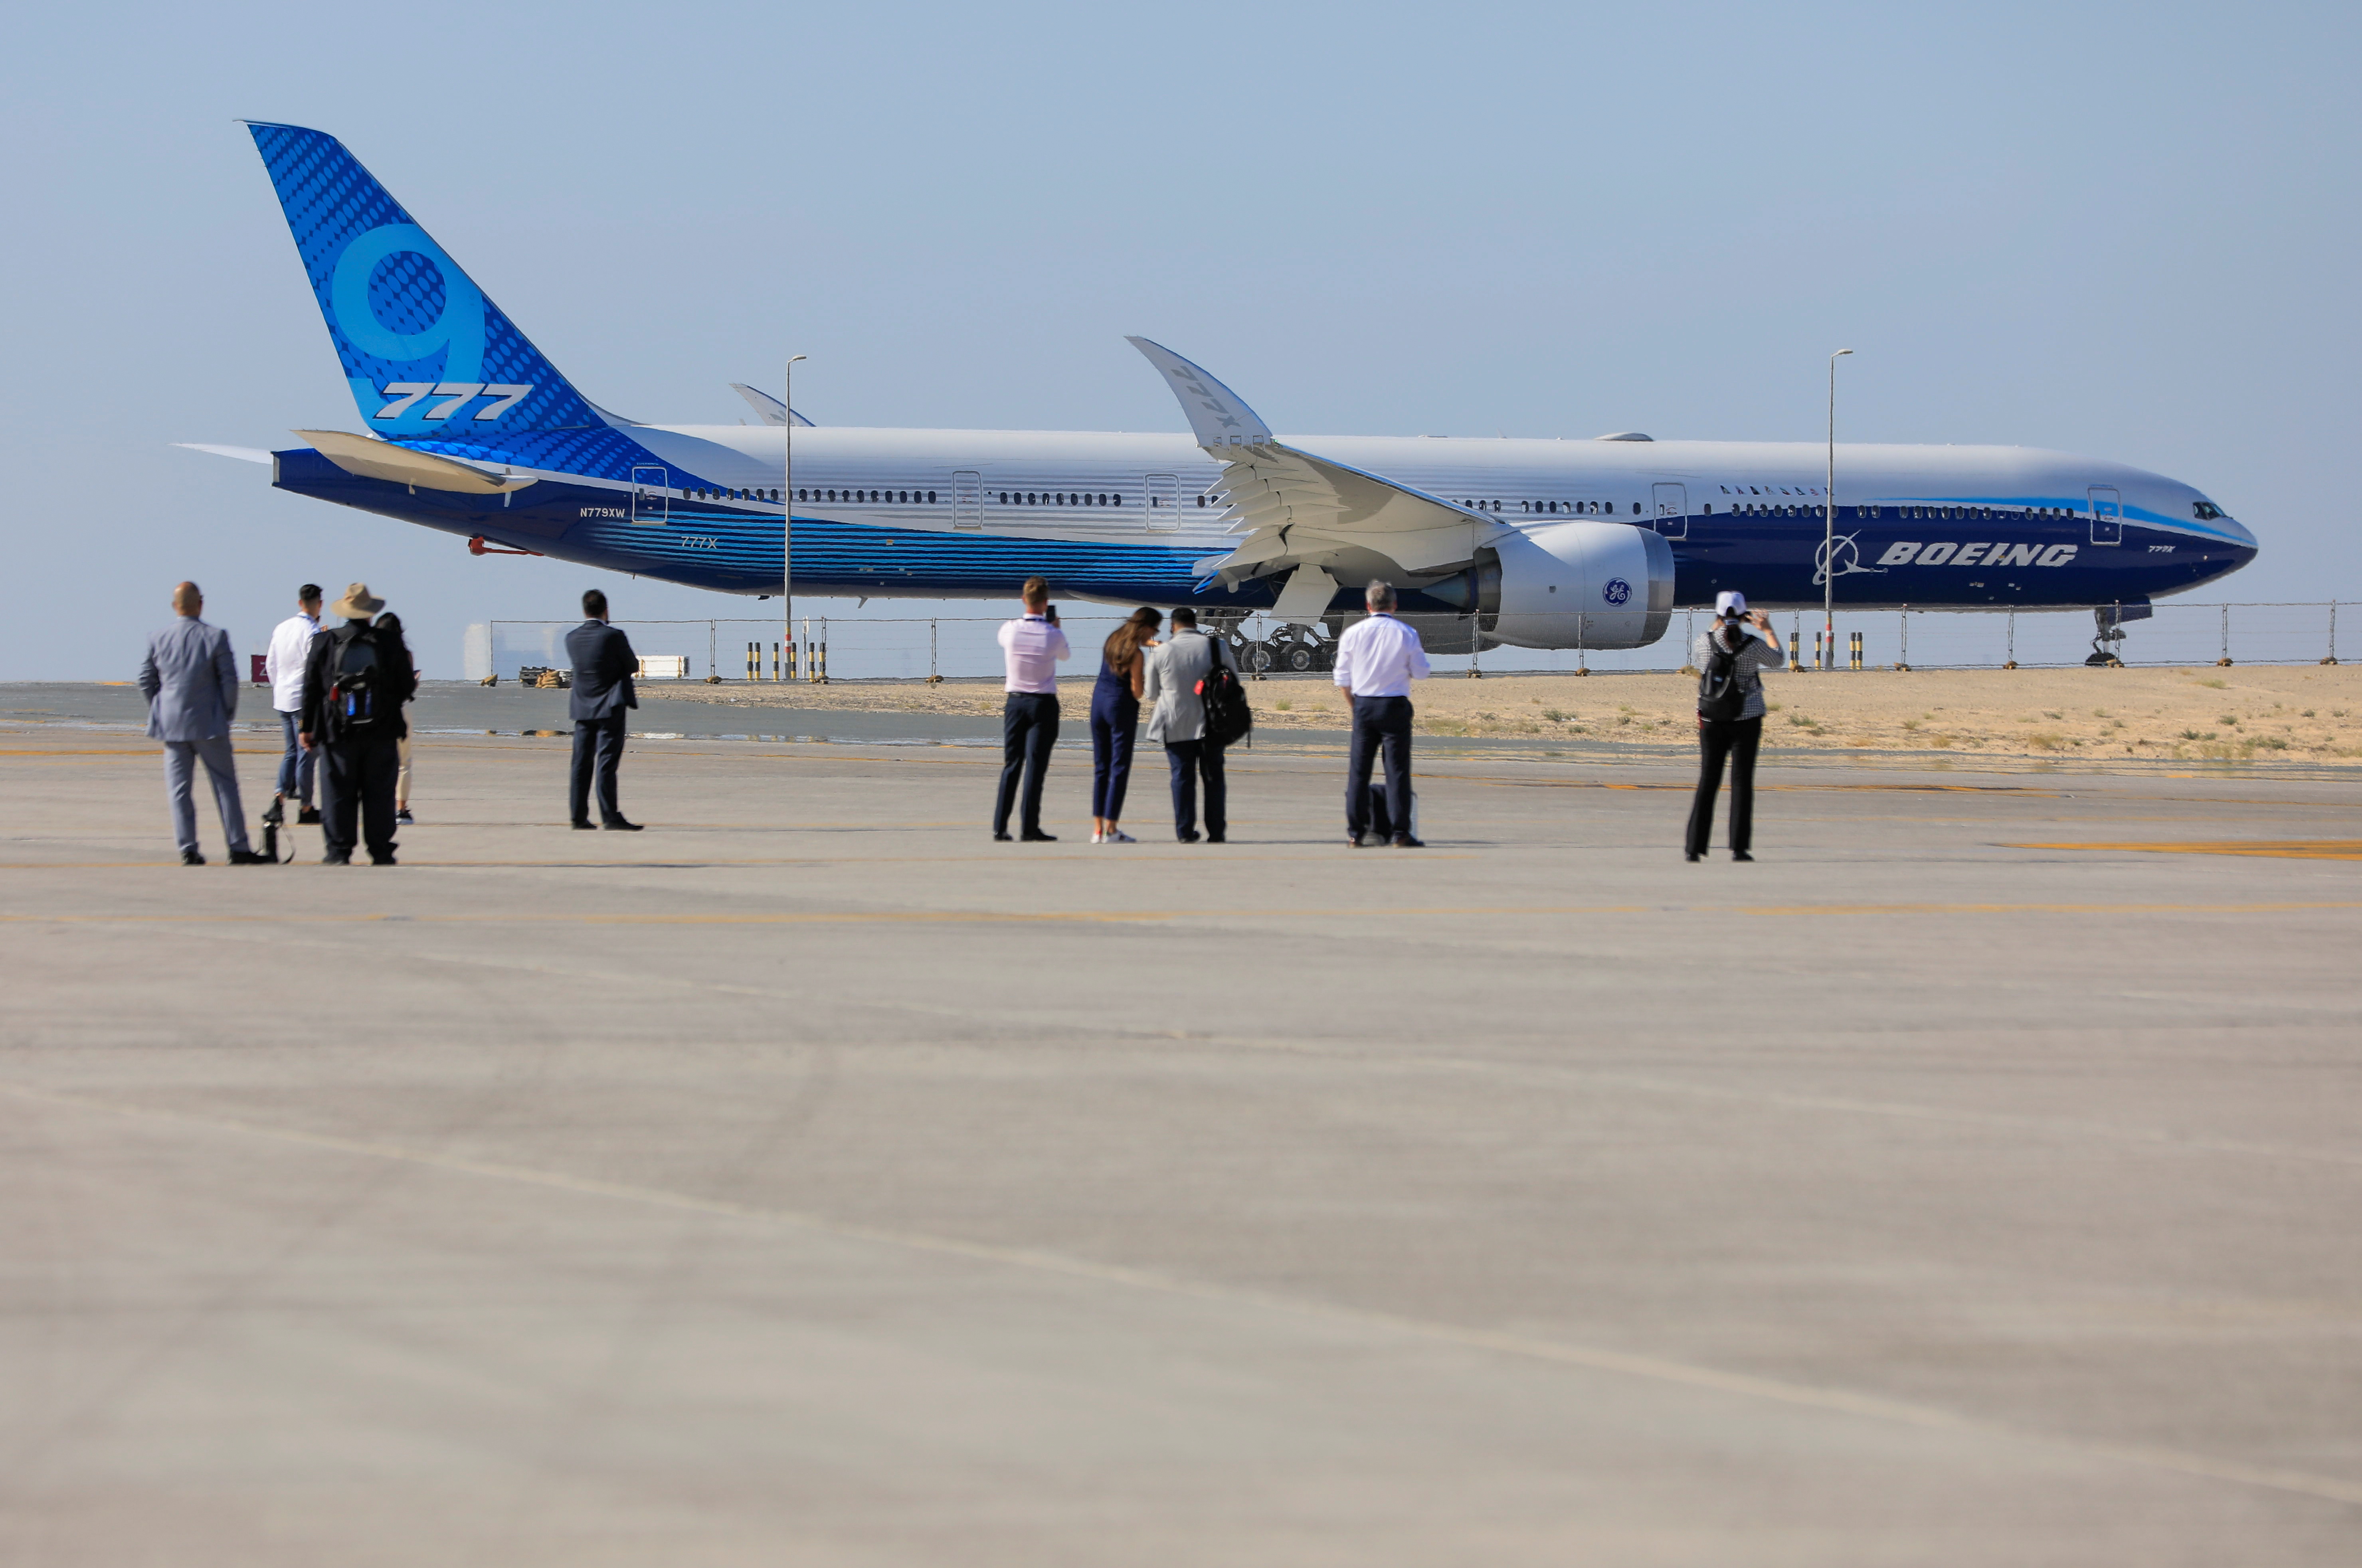 Visitors stand in front of the plane Boeing 777X during the Dubai Airshow, in Dubai